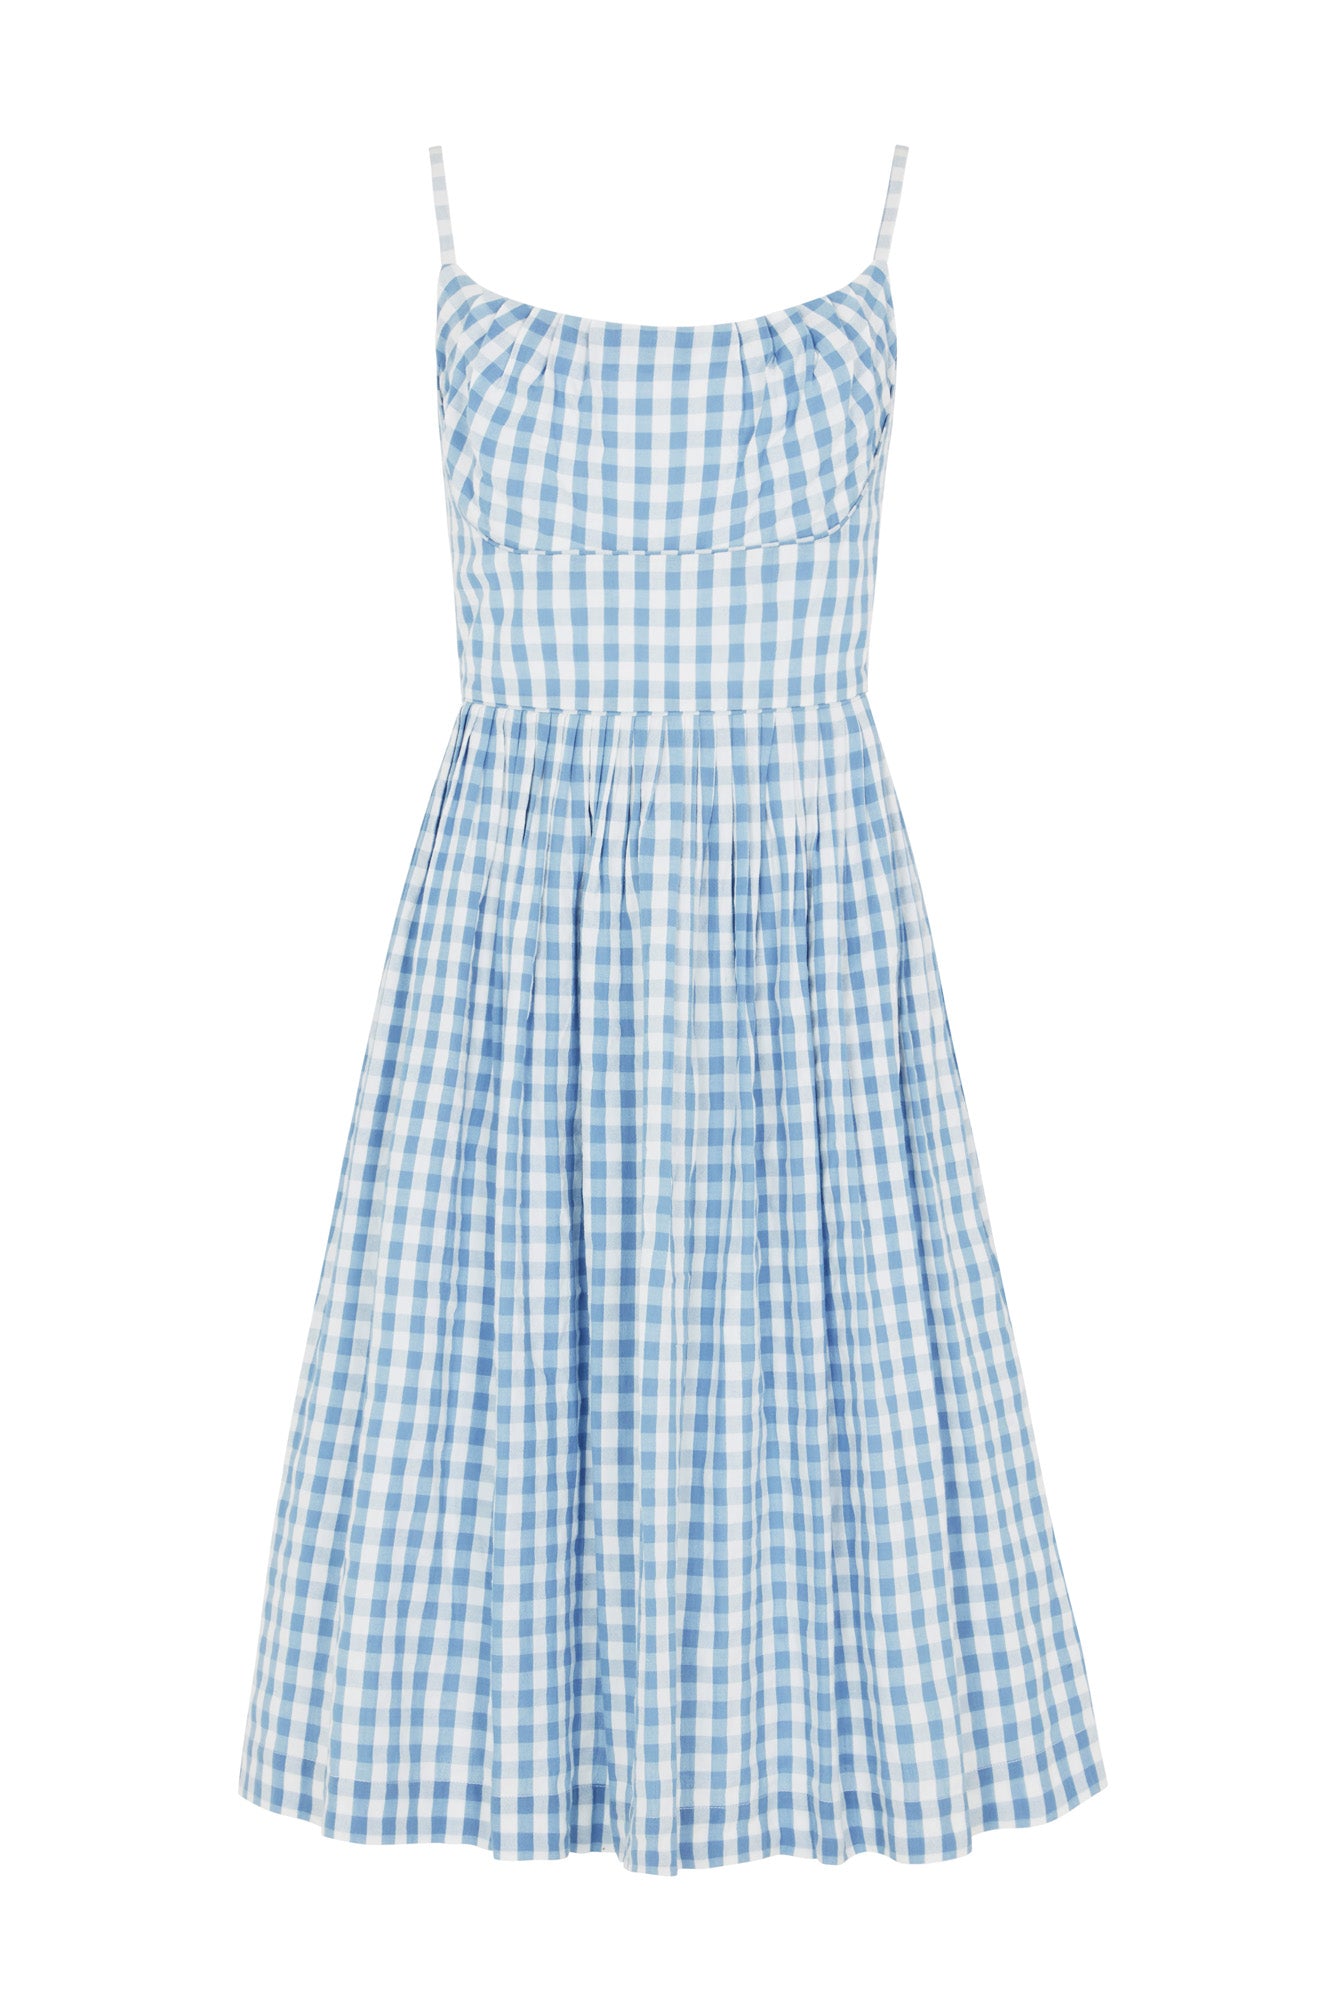 Image of Enid India Blue Check Dress Spring/Summer 2023 - Dress